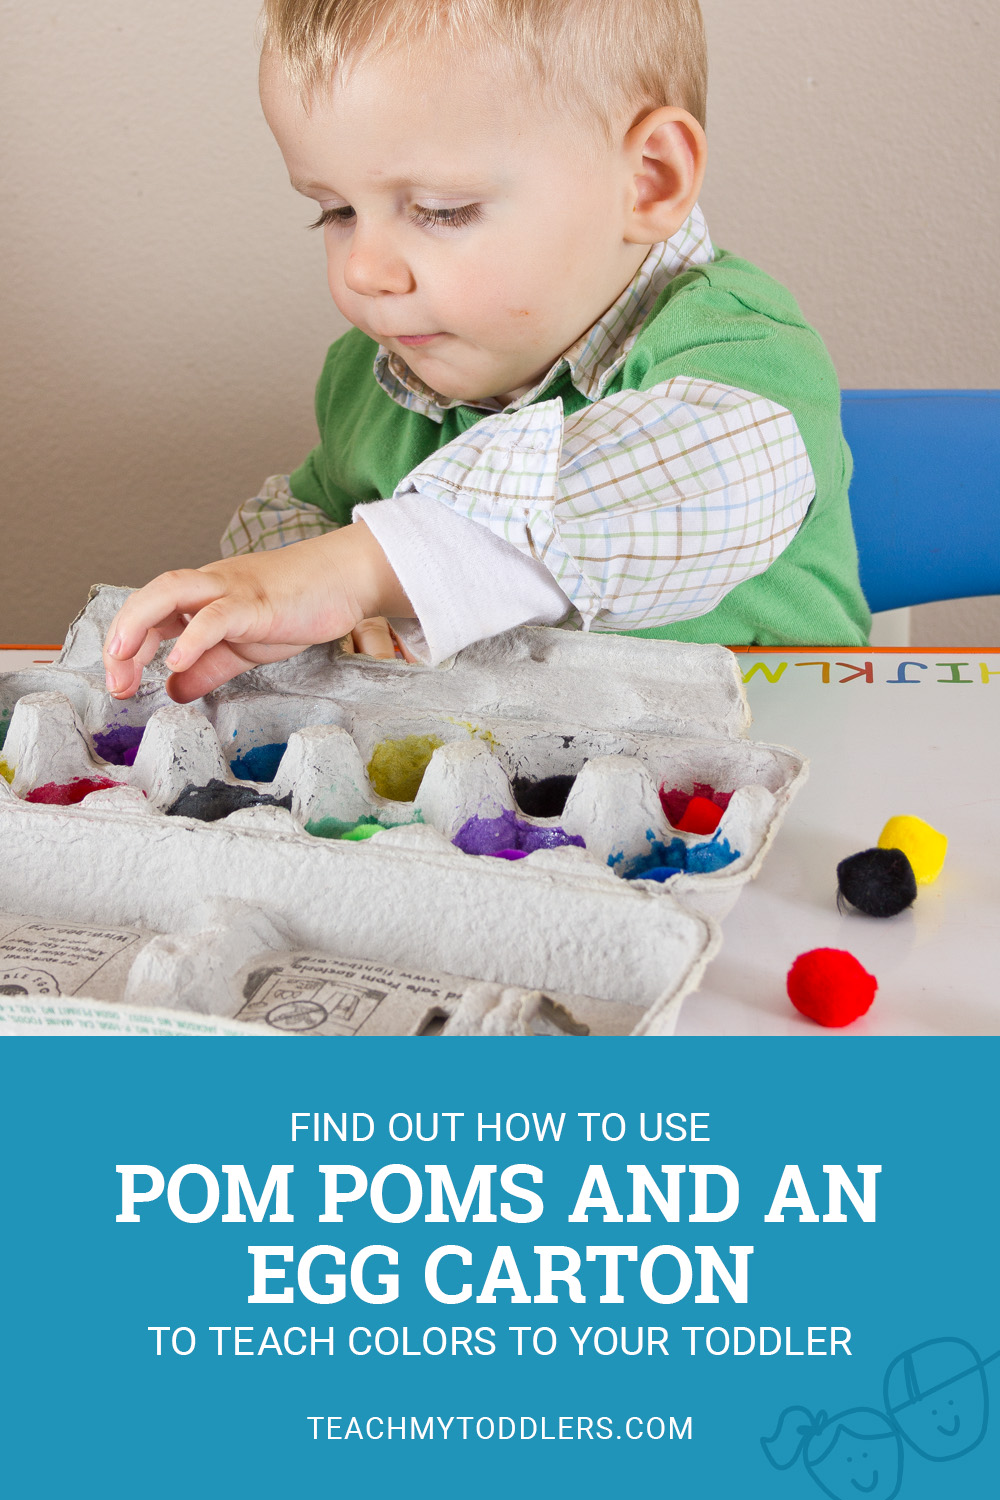 This egg carton and pom poms can teach your toddler all about colors